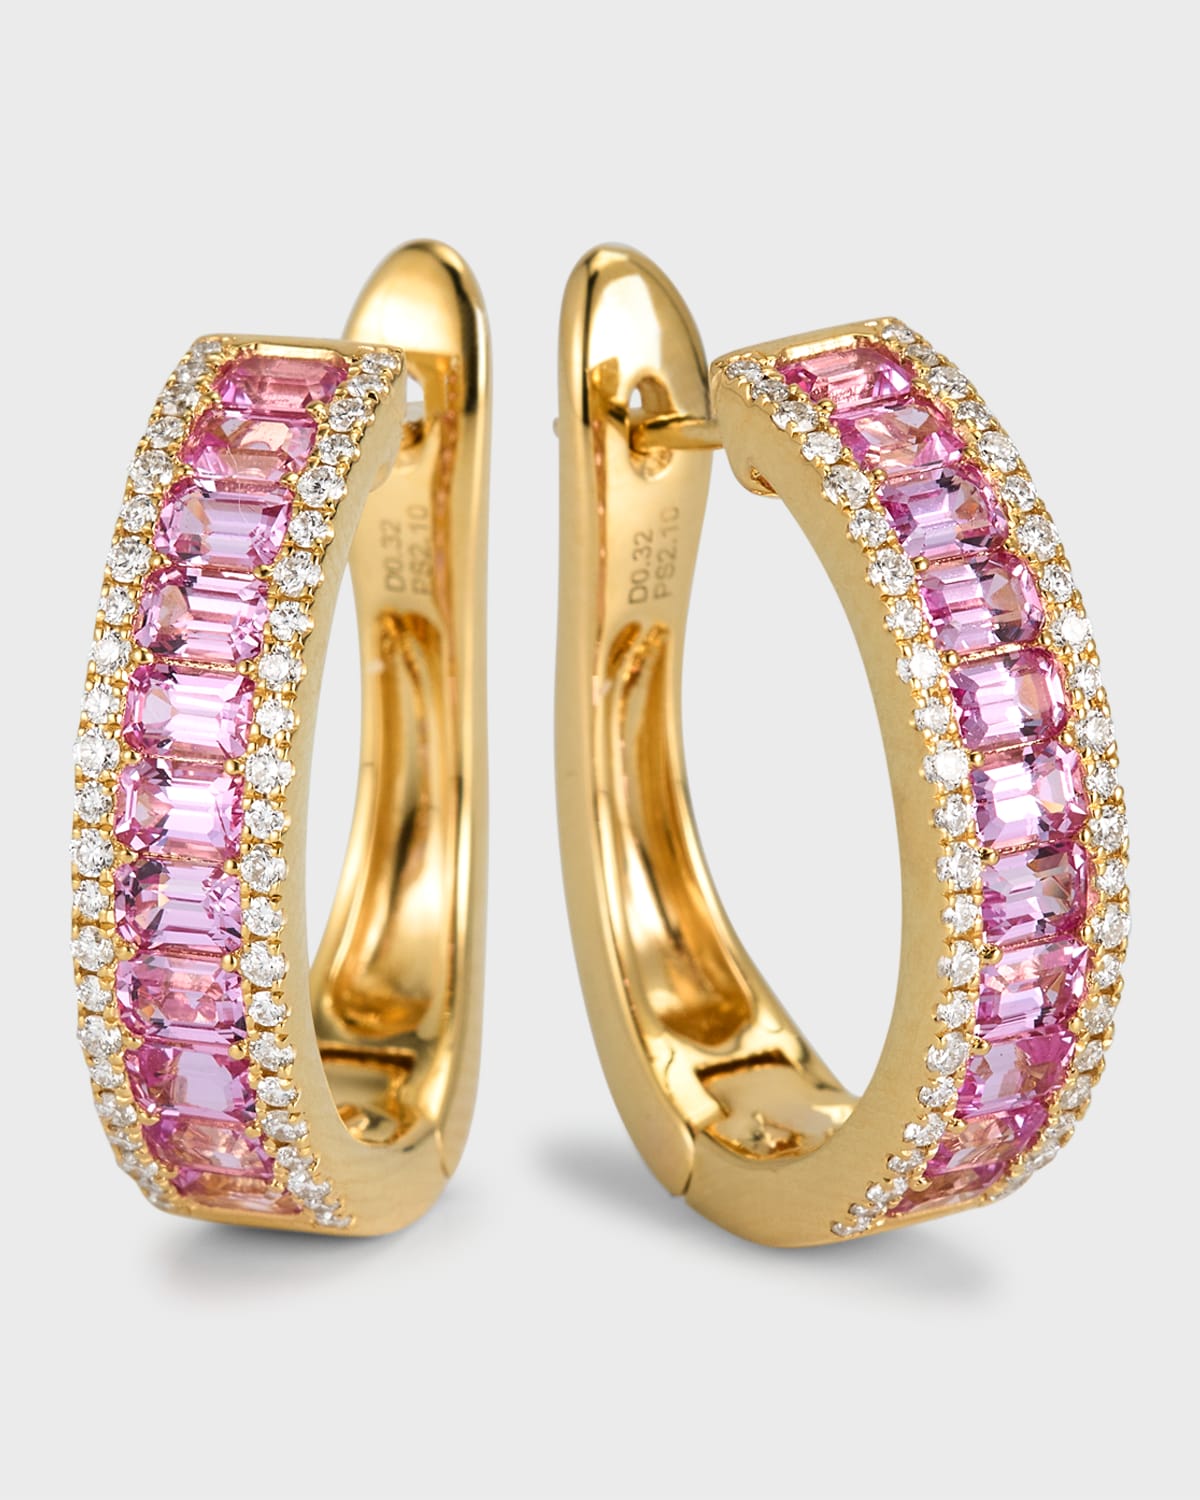 18K Yellow Gold Earrings with Pink Sapphires and Diamonds